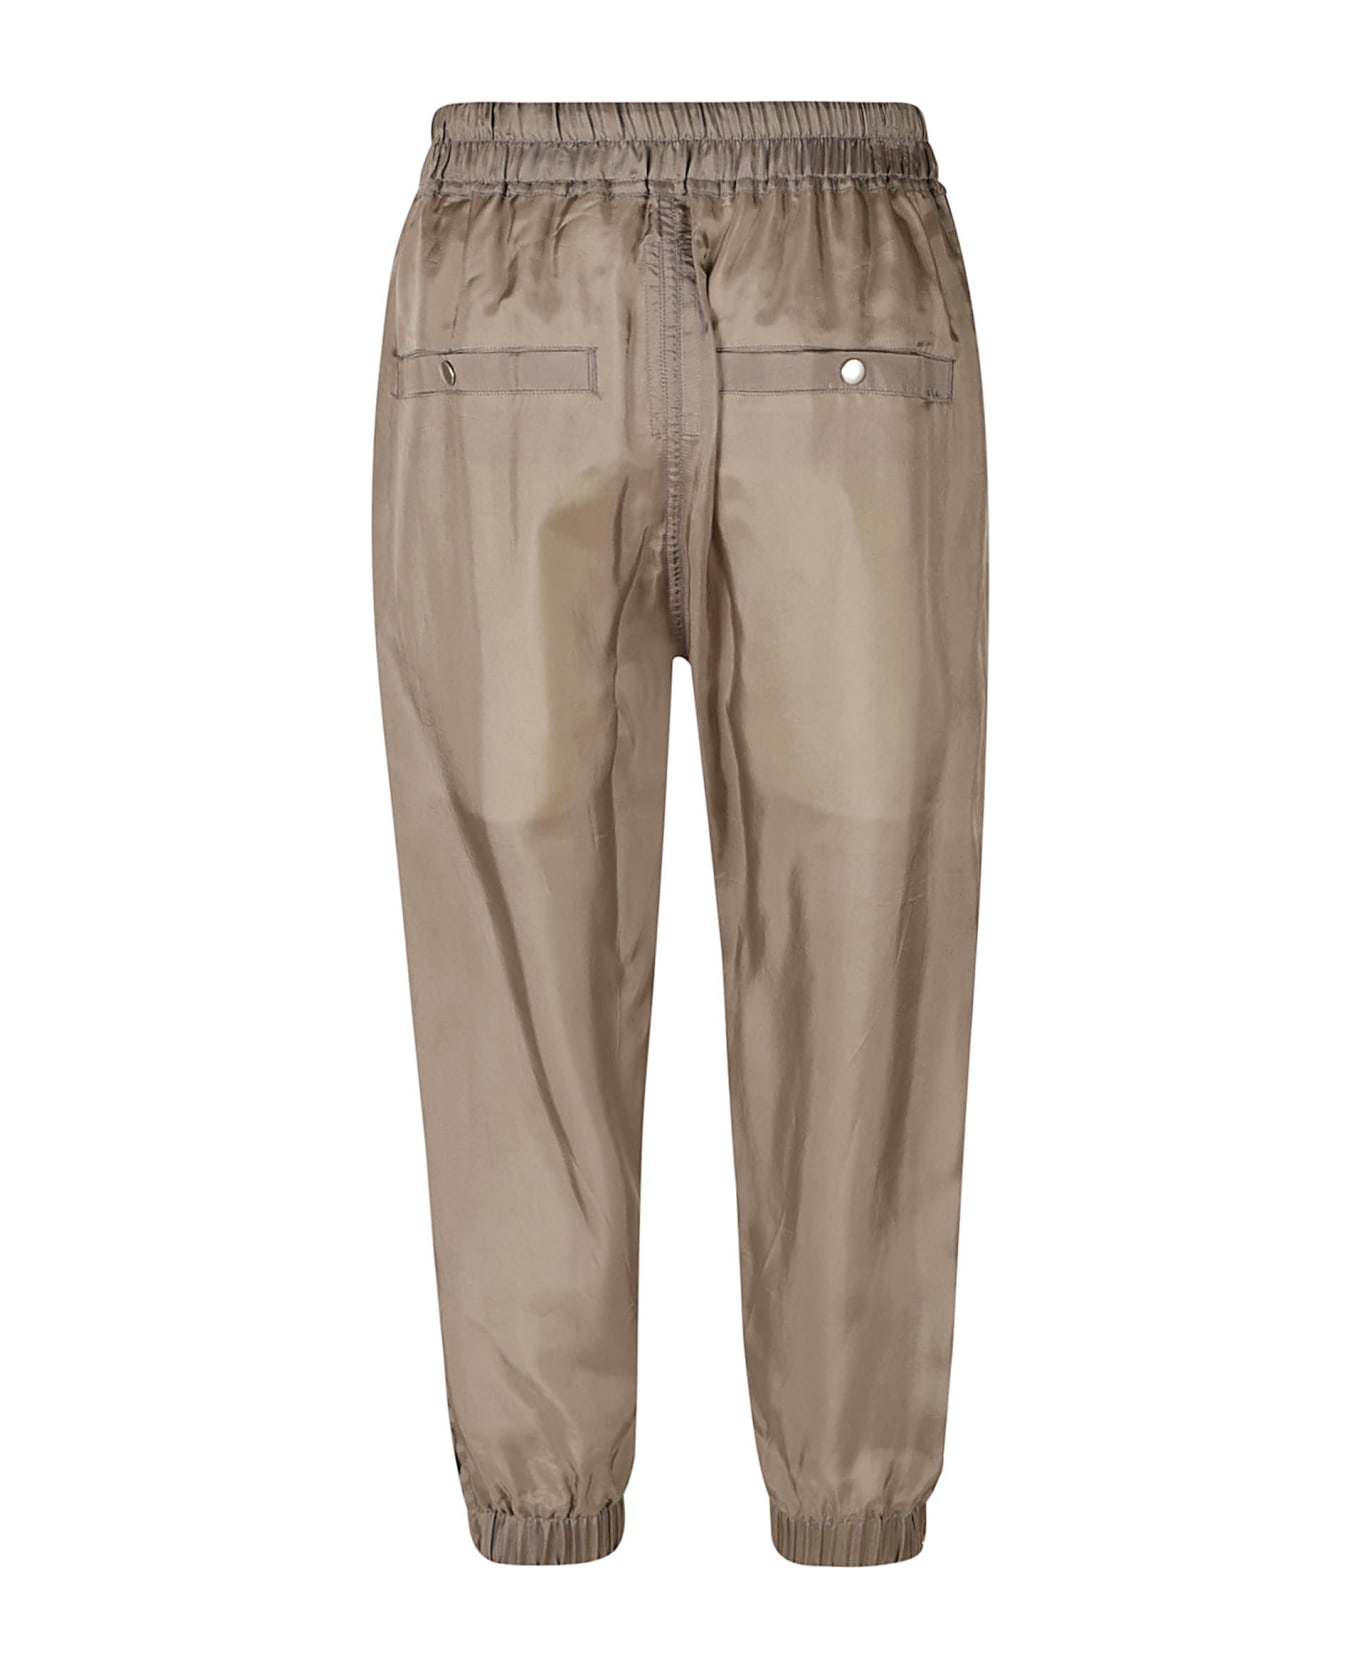 Rick Owens Cropped Track Pants - Dust